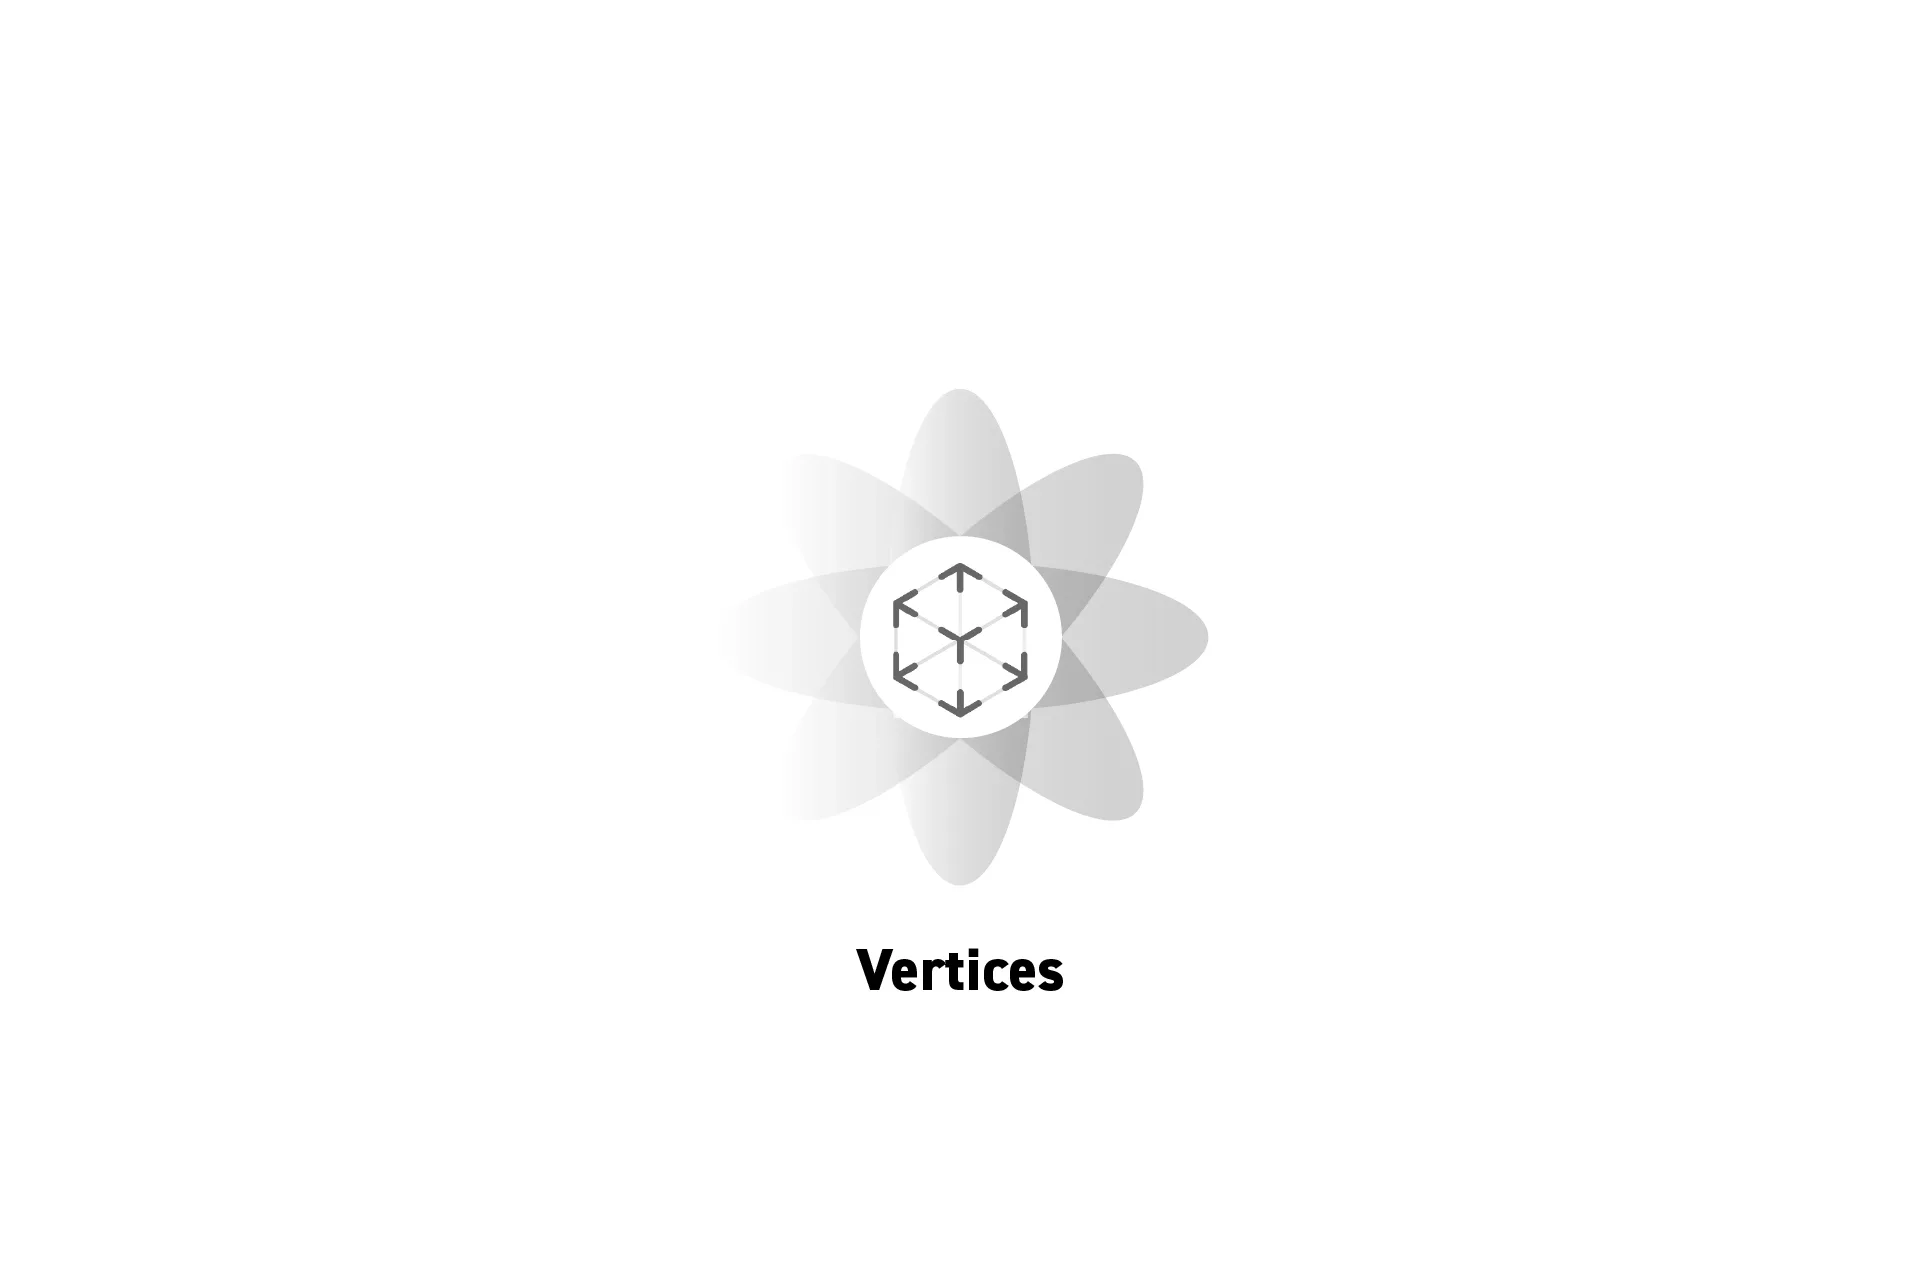 A flower that represents spatial computing with the text "Vertices" beneath it.